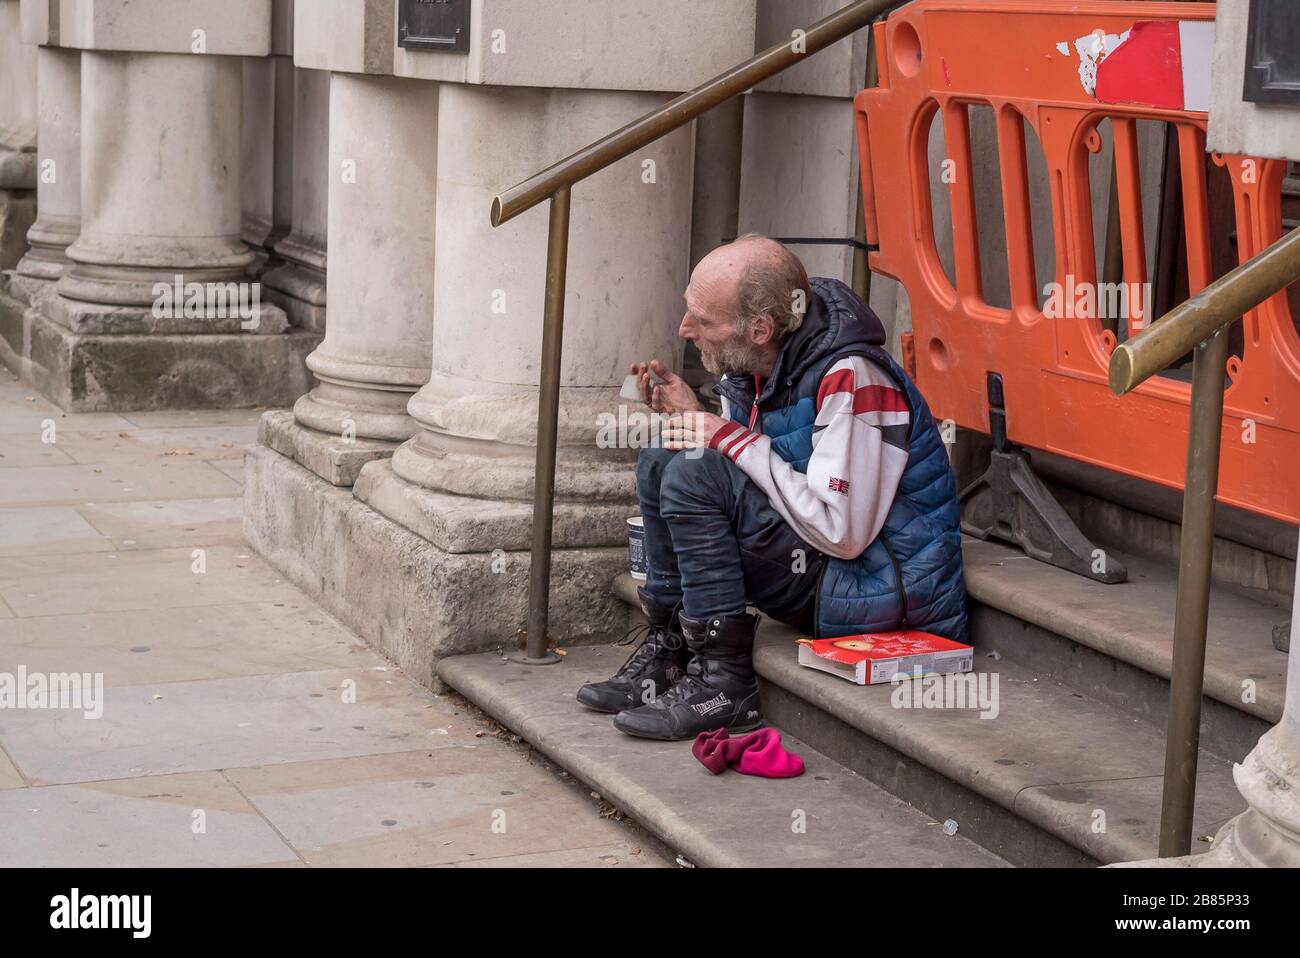 Sad homeless man sitting in doorway on the street, central London UK. Homelessness in Britain, people without a home sleeping rough begging in city. Stock Photo